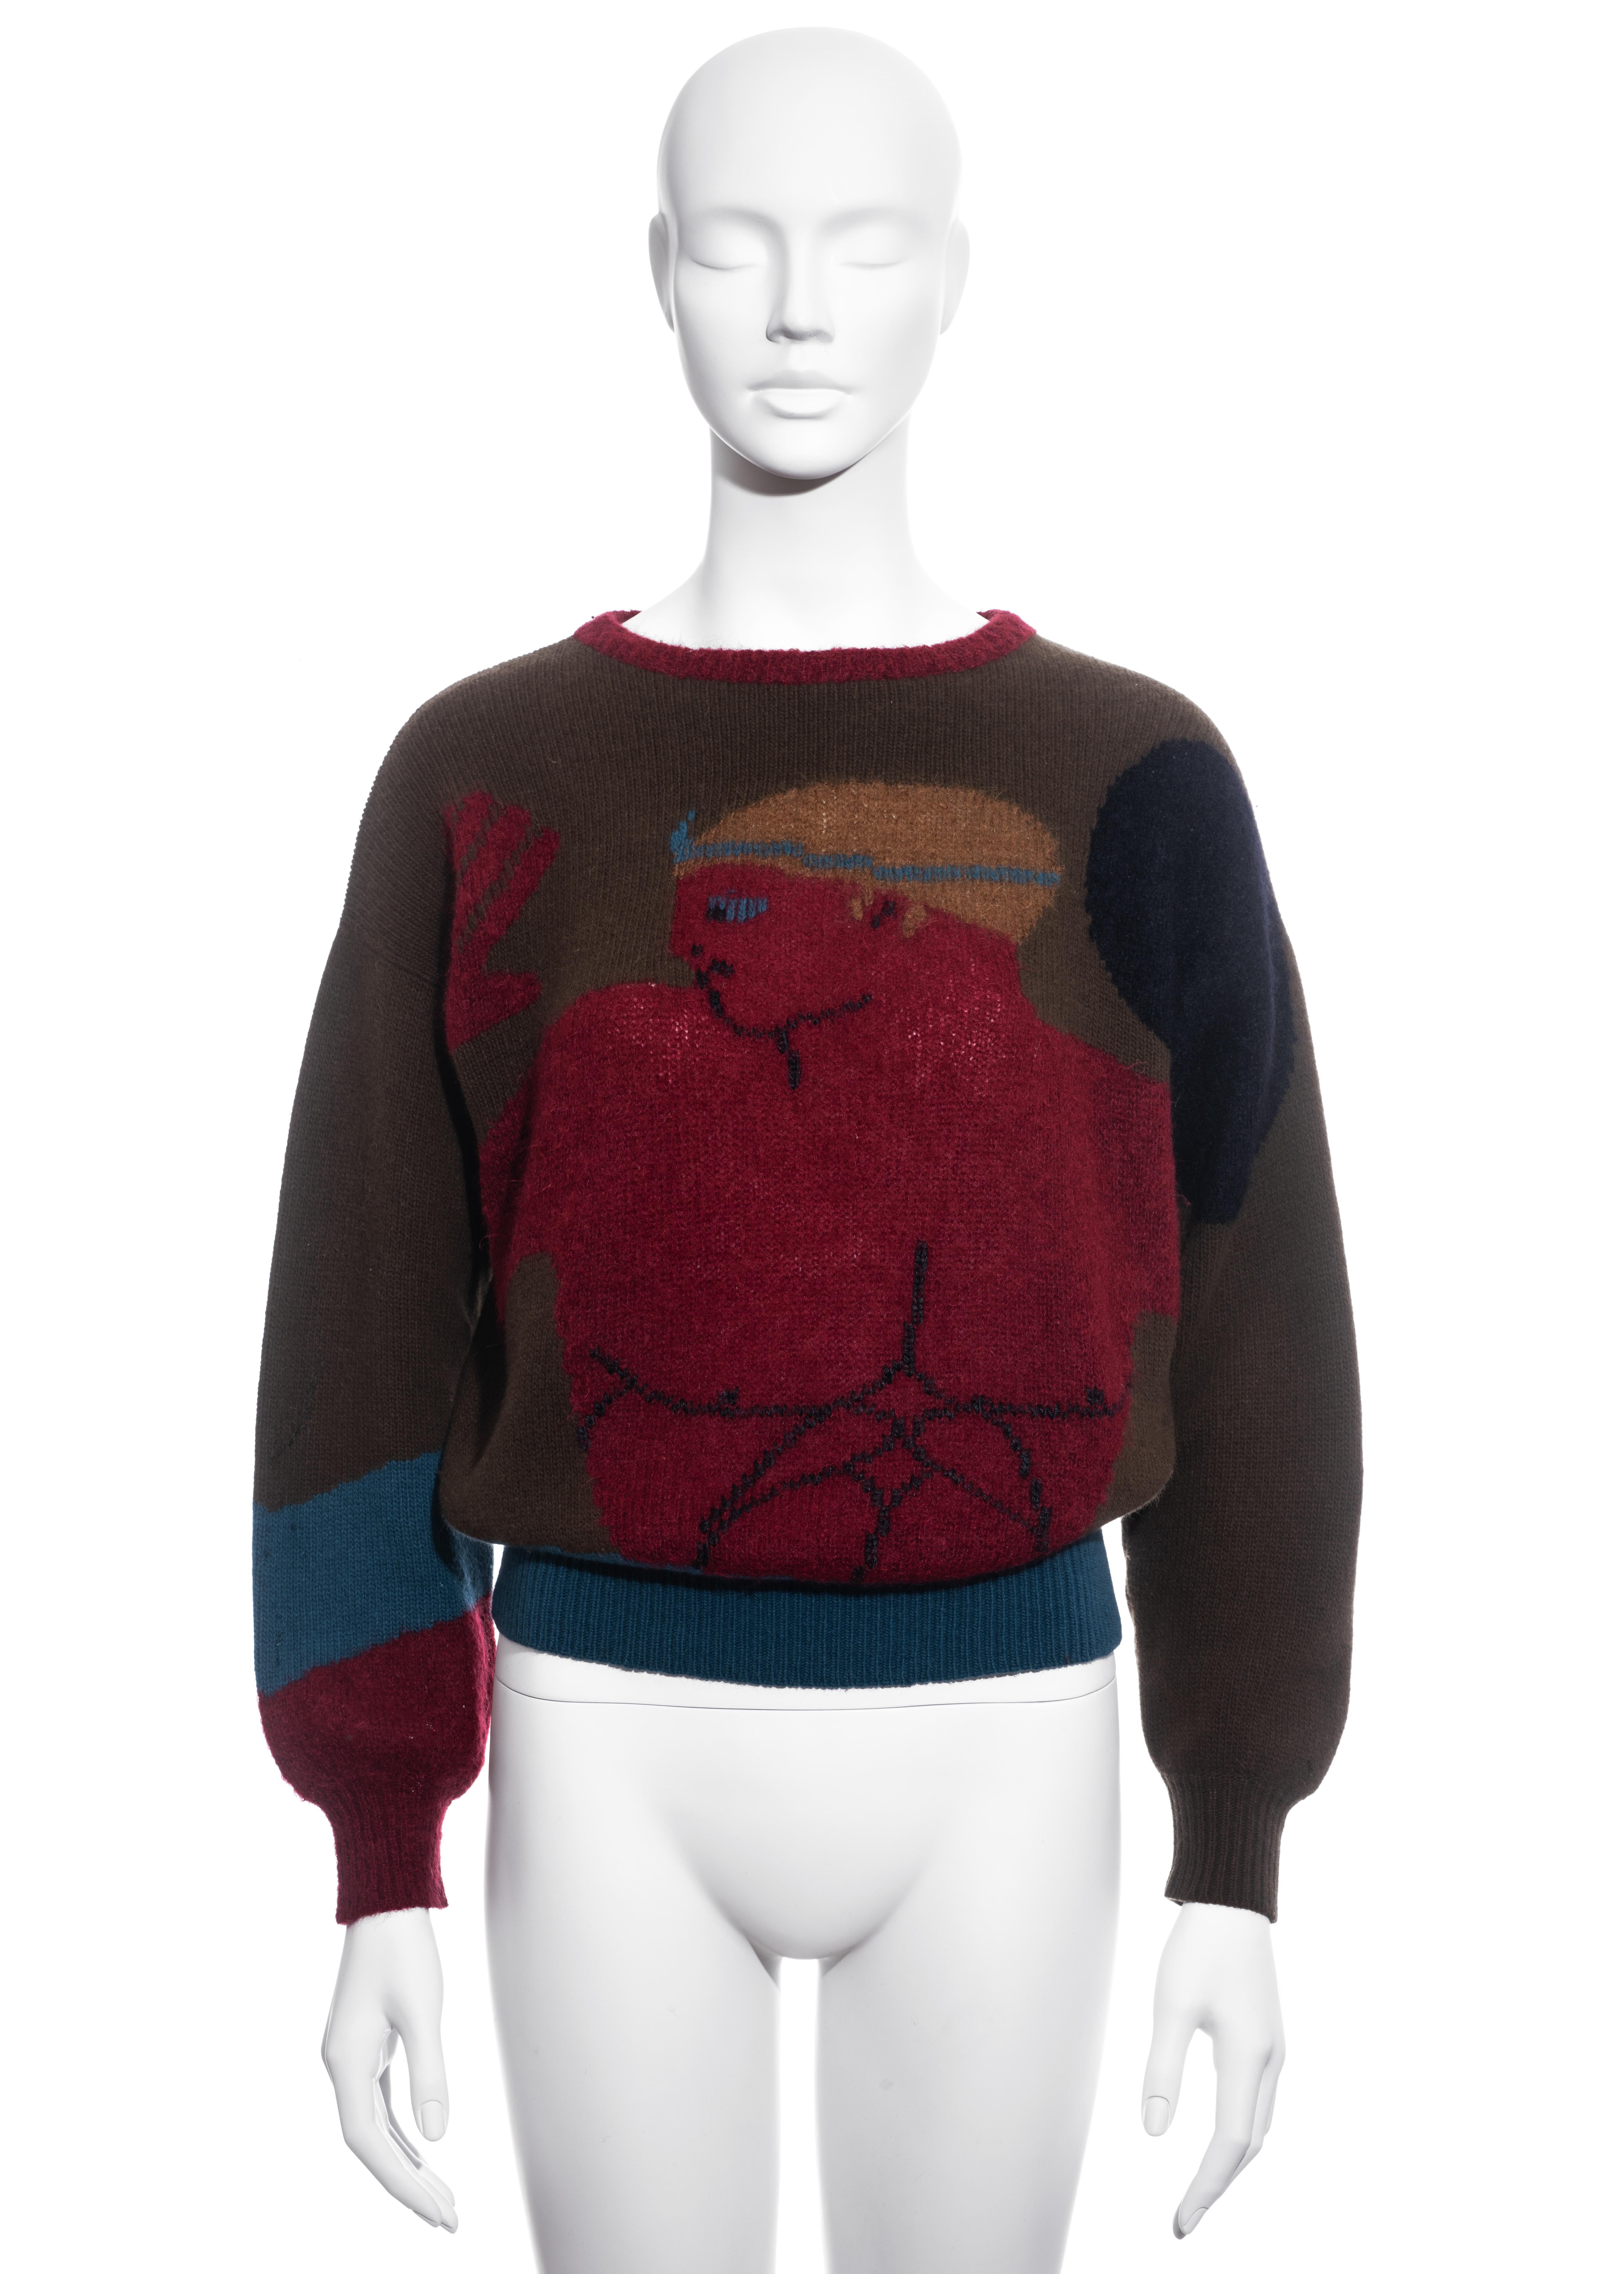 ▪ Knitted mohair sweater 
▪ Brown, red and turquoise 
▪ Ancient Greek mythology theme
▪ Small
▪ Fall-Winter 1982